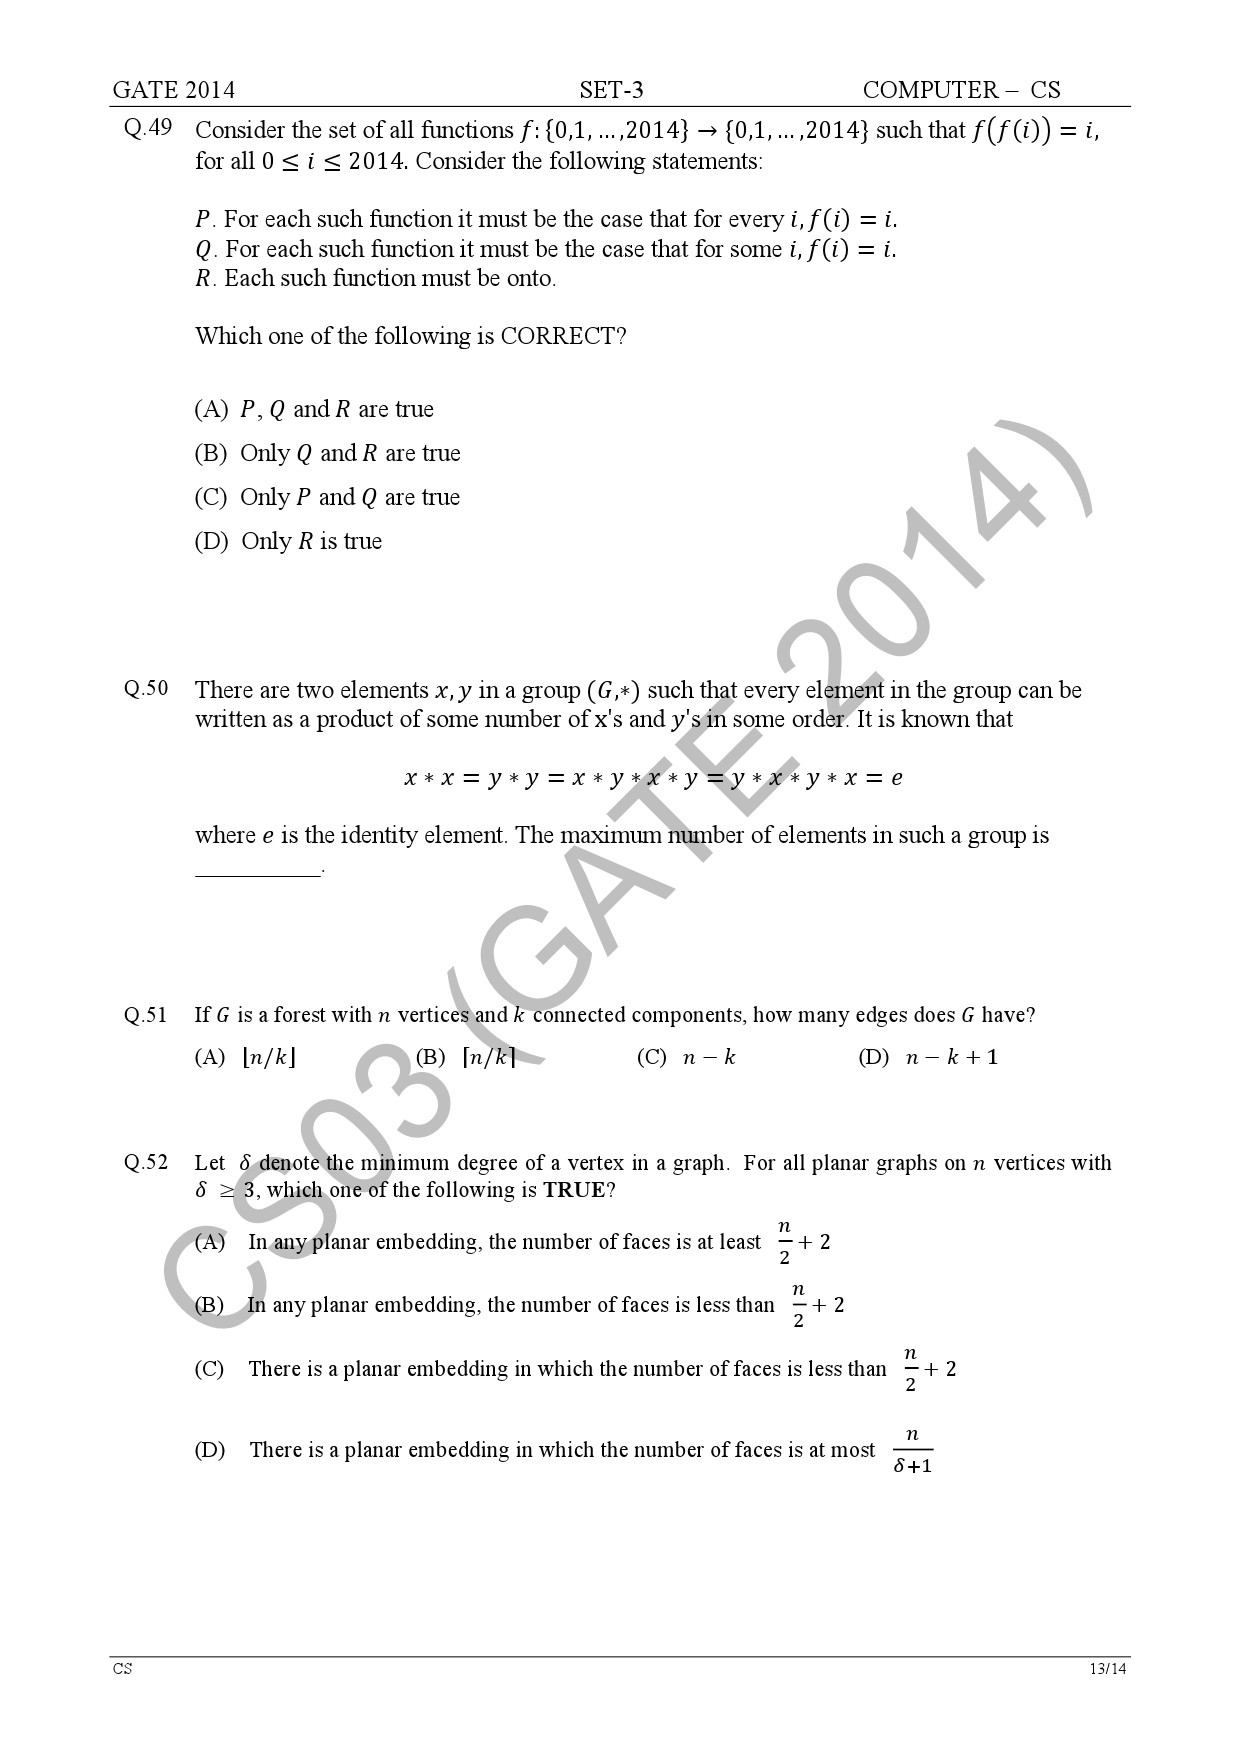 GATE Exam Question Paper 2014 Computer Science and Information Technology Set 3 19